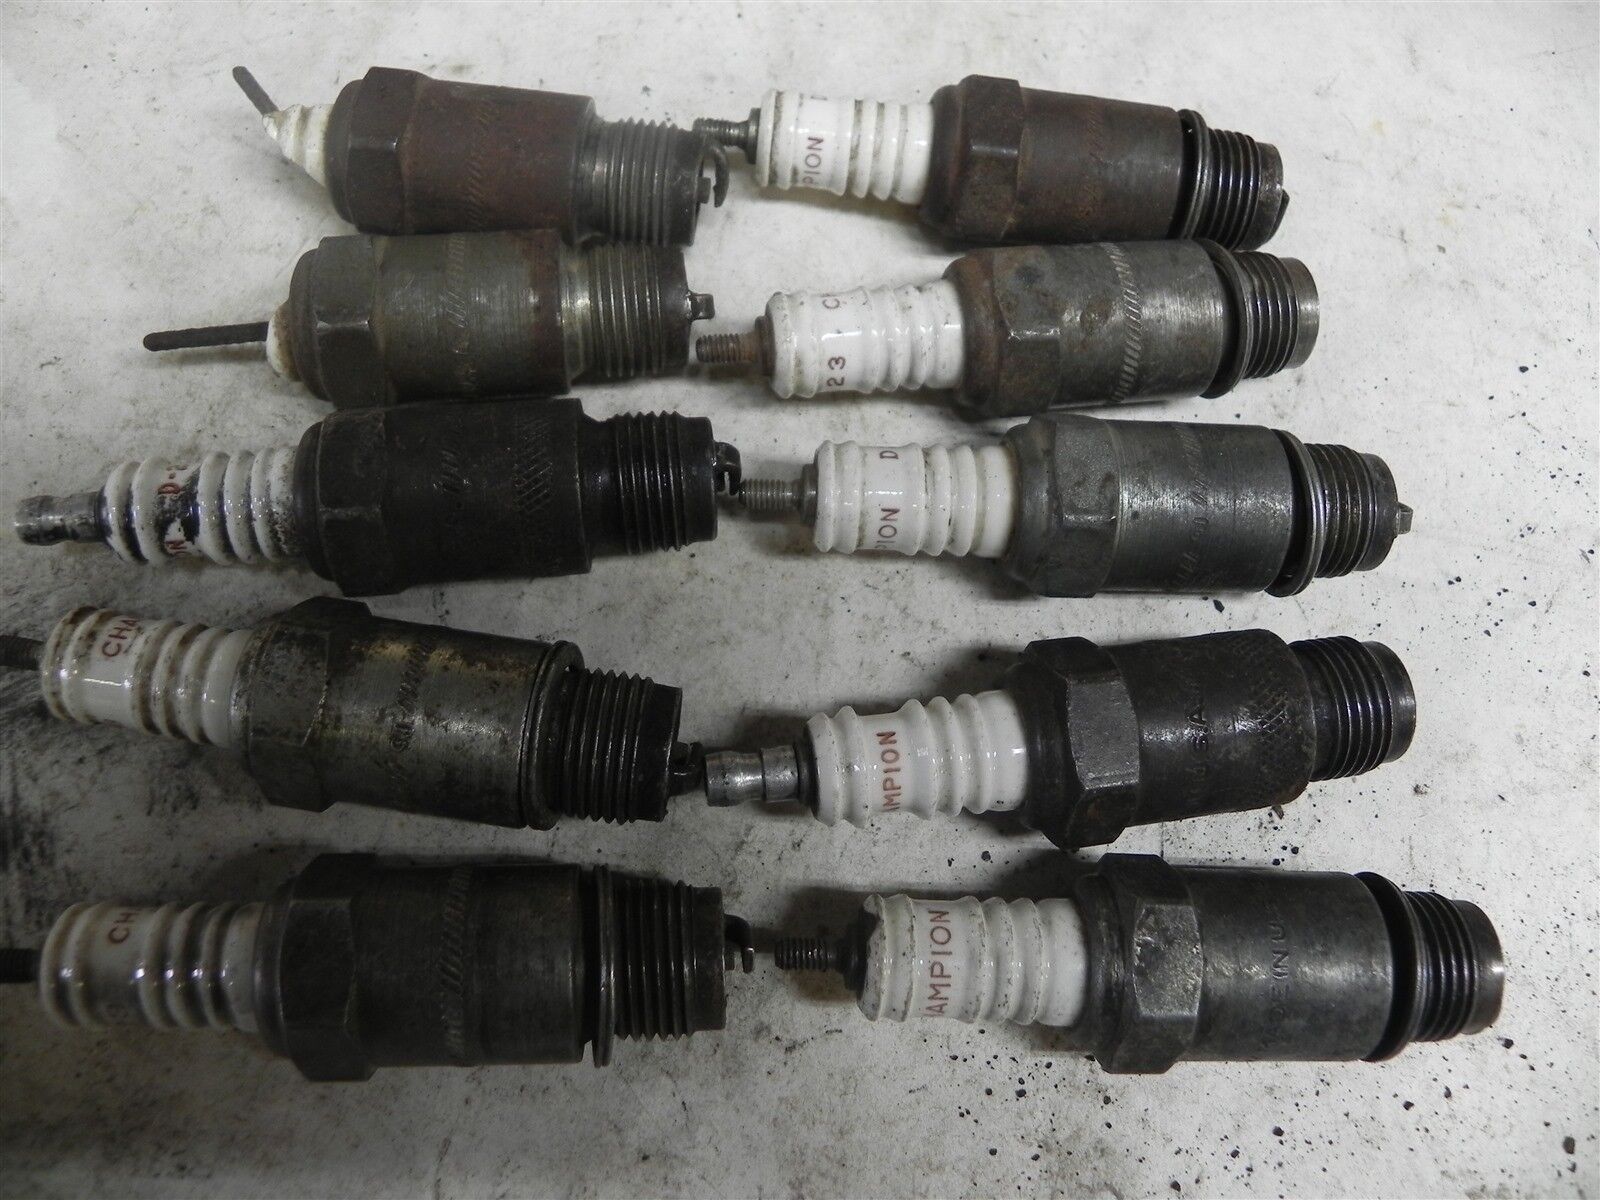 CHAMPION D23 VINTAGE SPARK PLUG LOT USED HIT MISS ENGINE TRACTOR AND OTHERS COOL